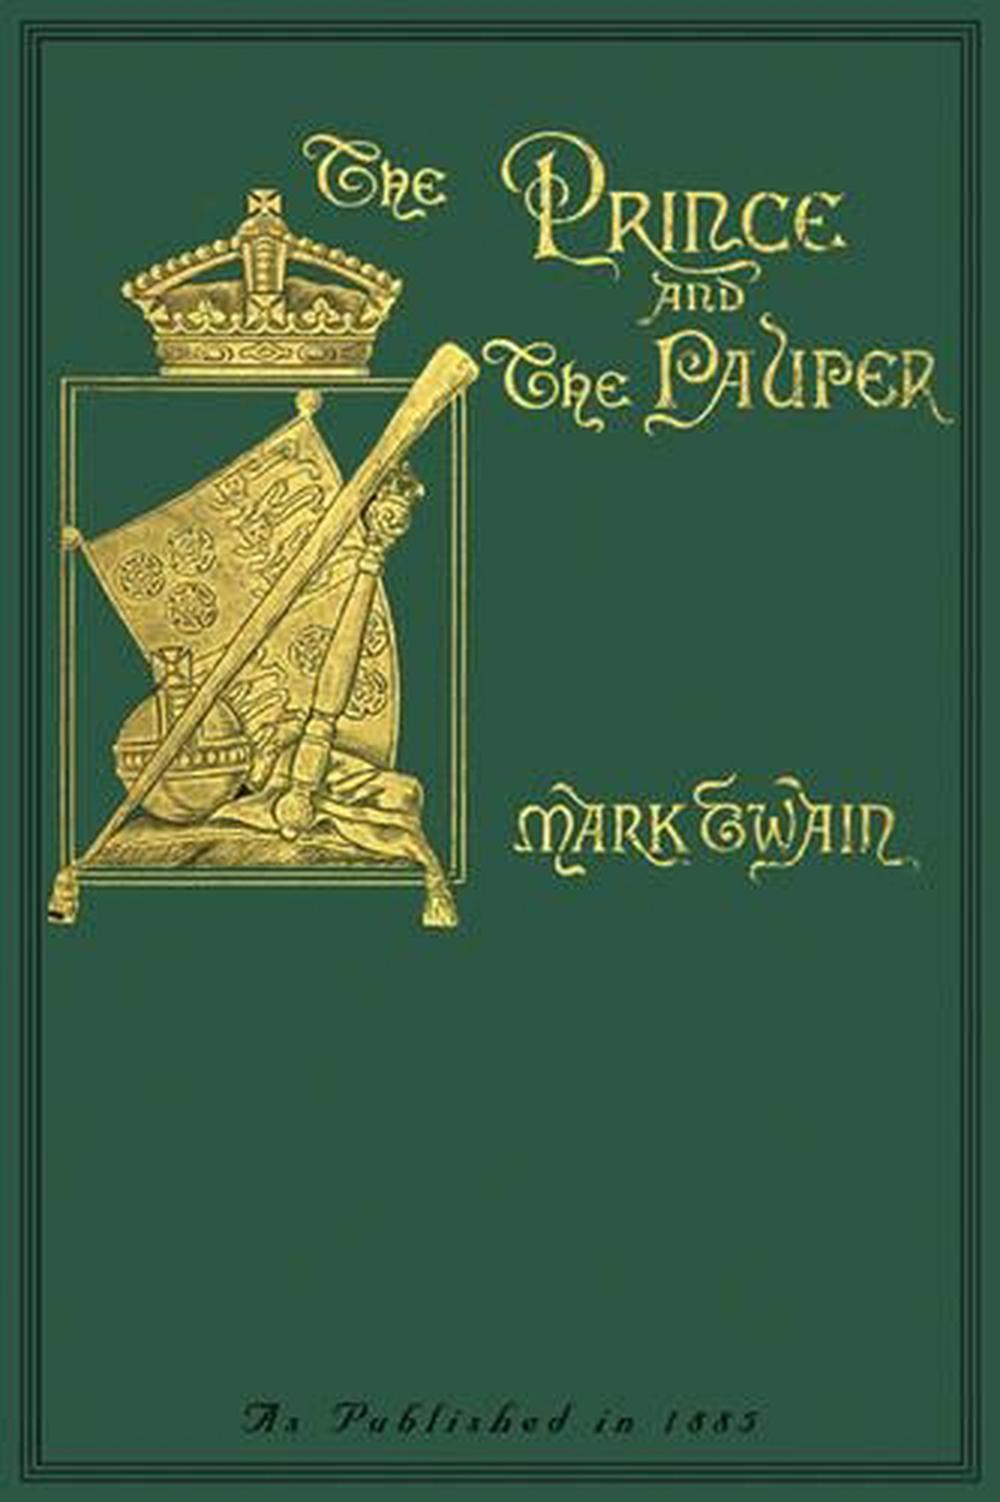 mark twain book prince and the pauper